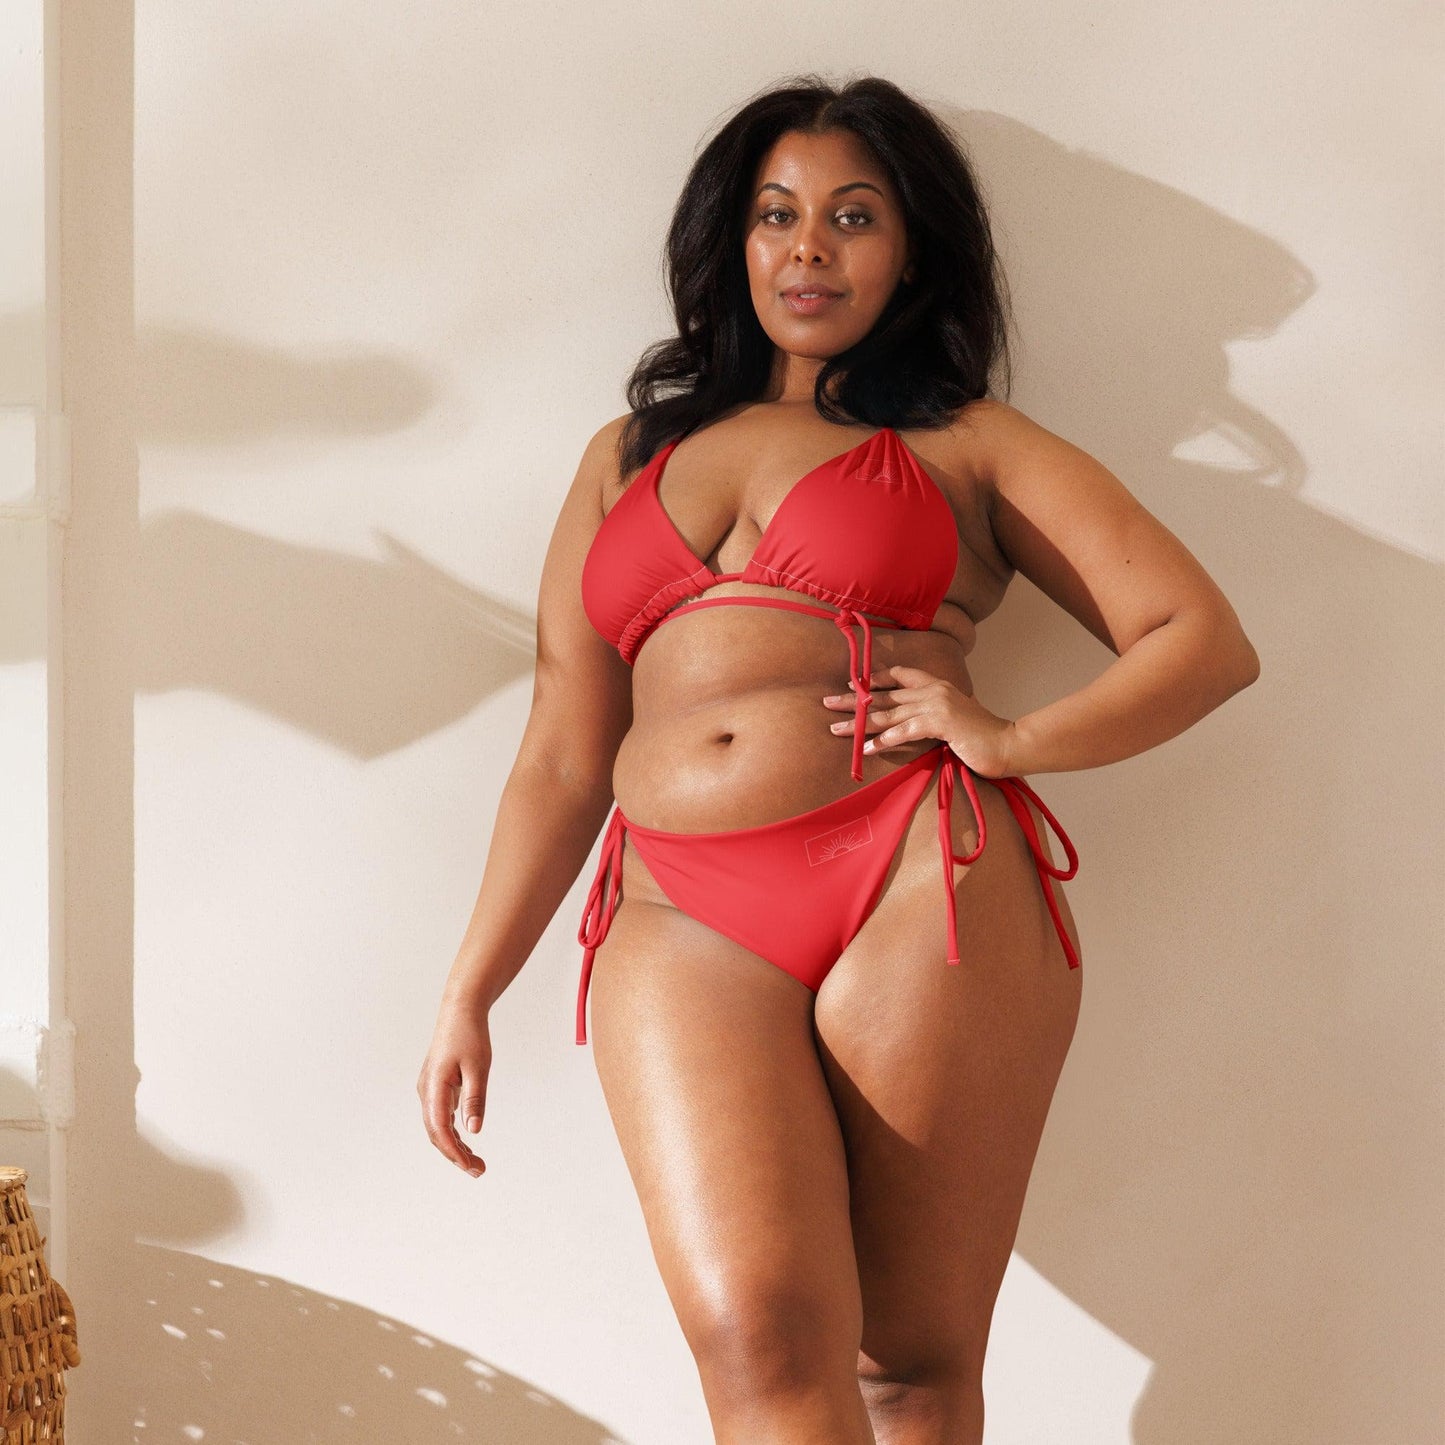 Local Summer Collective Just A Solid Red Recycled String Bikini